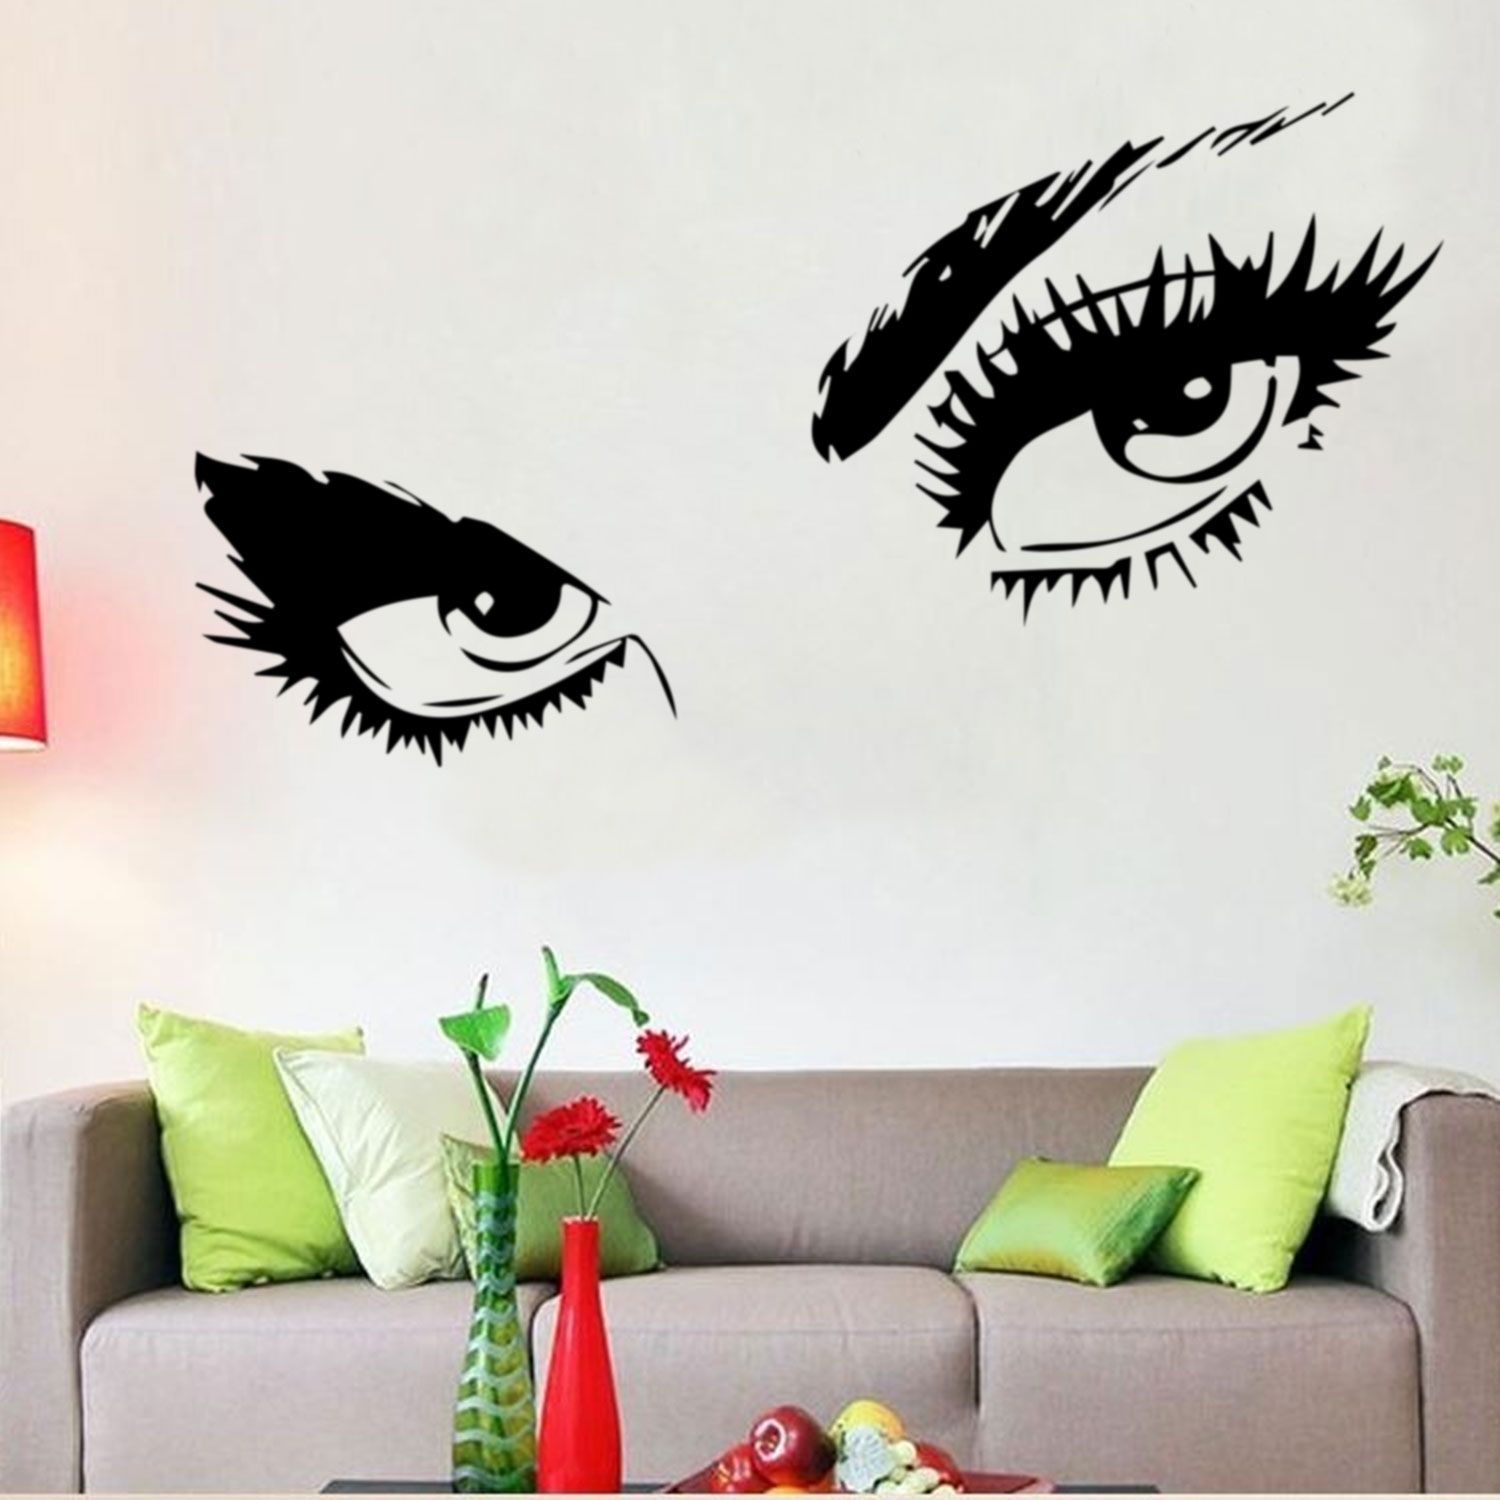 Audrey Hepburn Sexy Eyes / Attractive Eye Wall Decal Art Decor Pertaining To Wall Sticker Art (View 7 of 20)